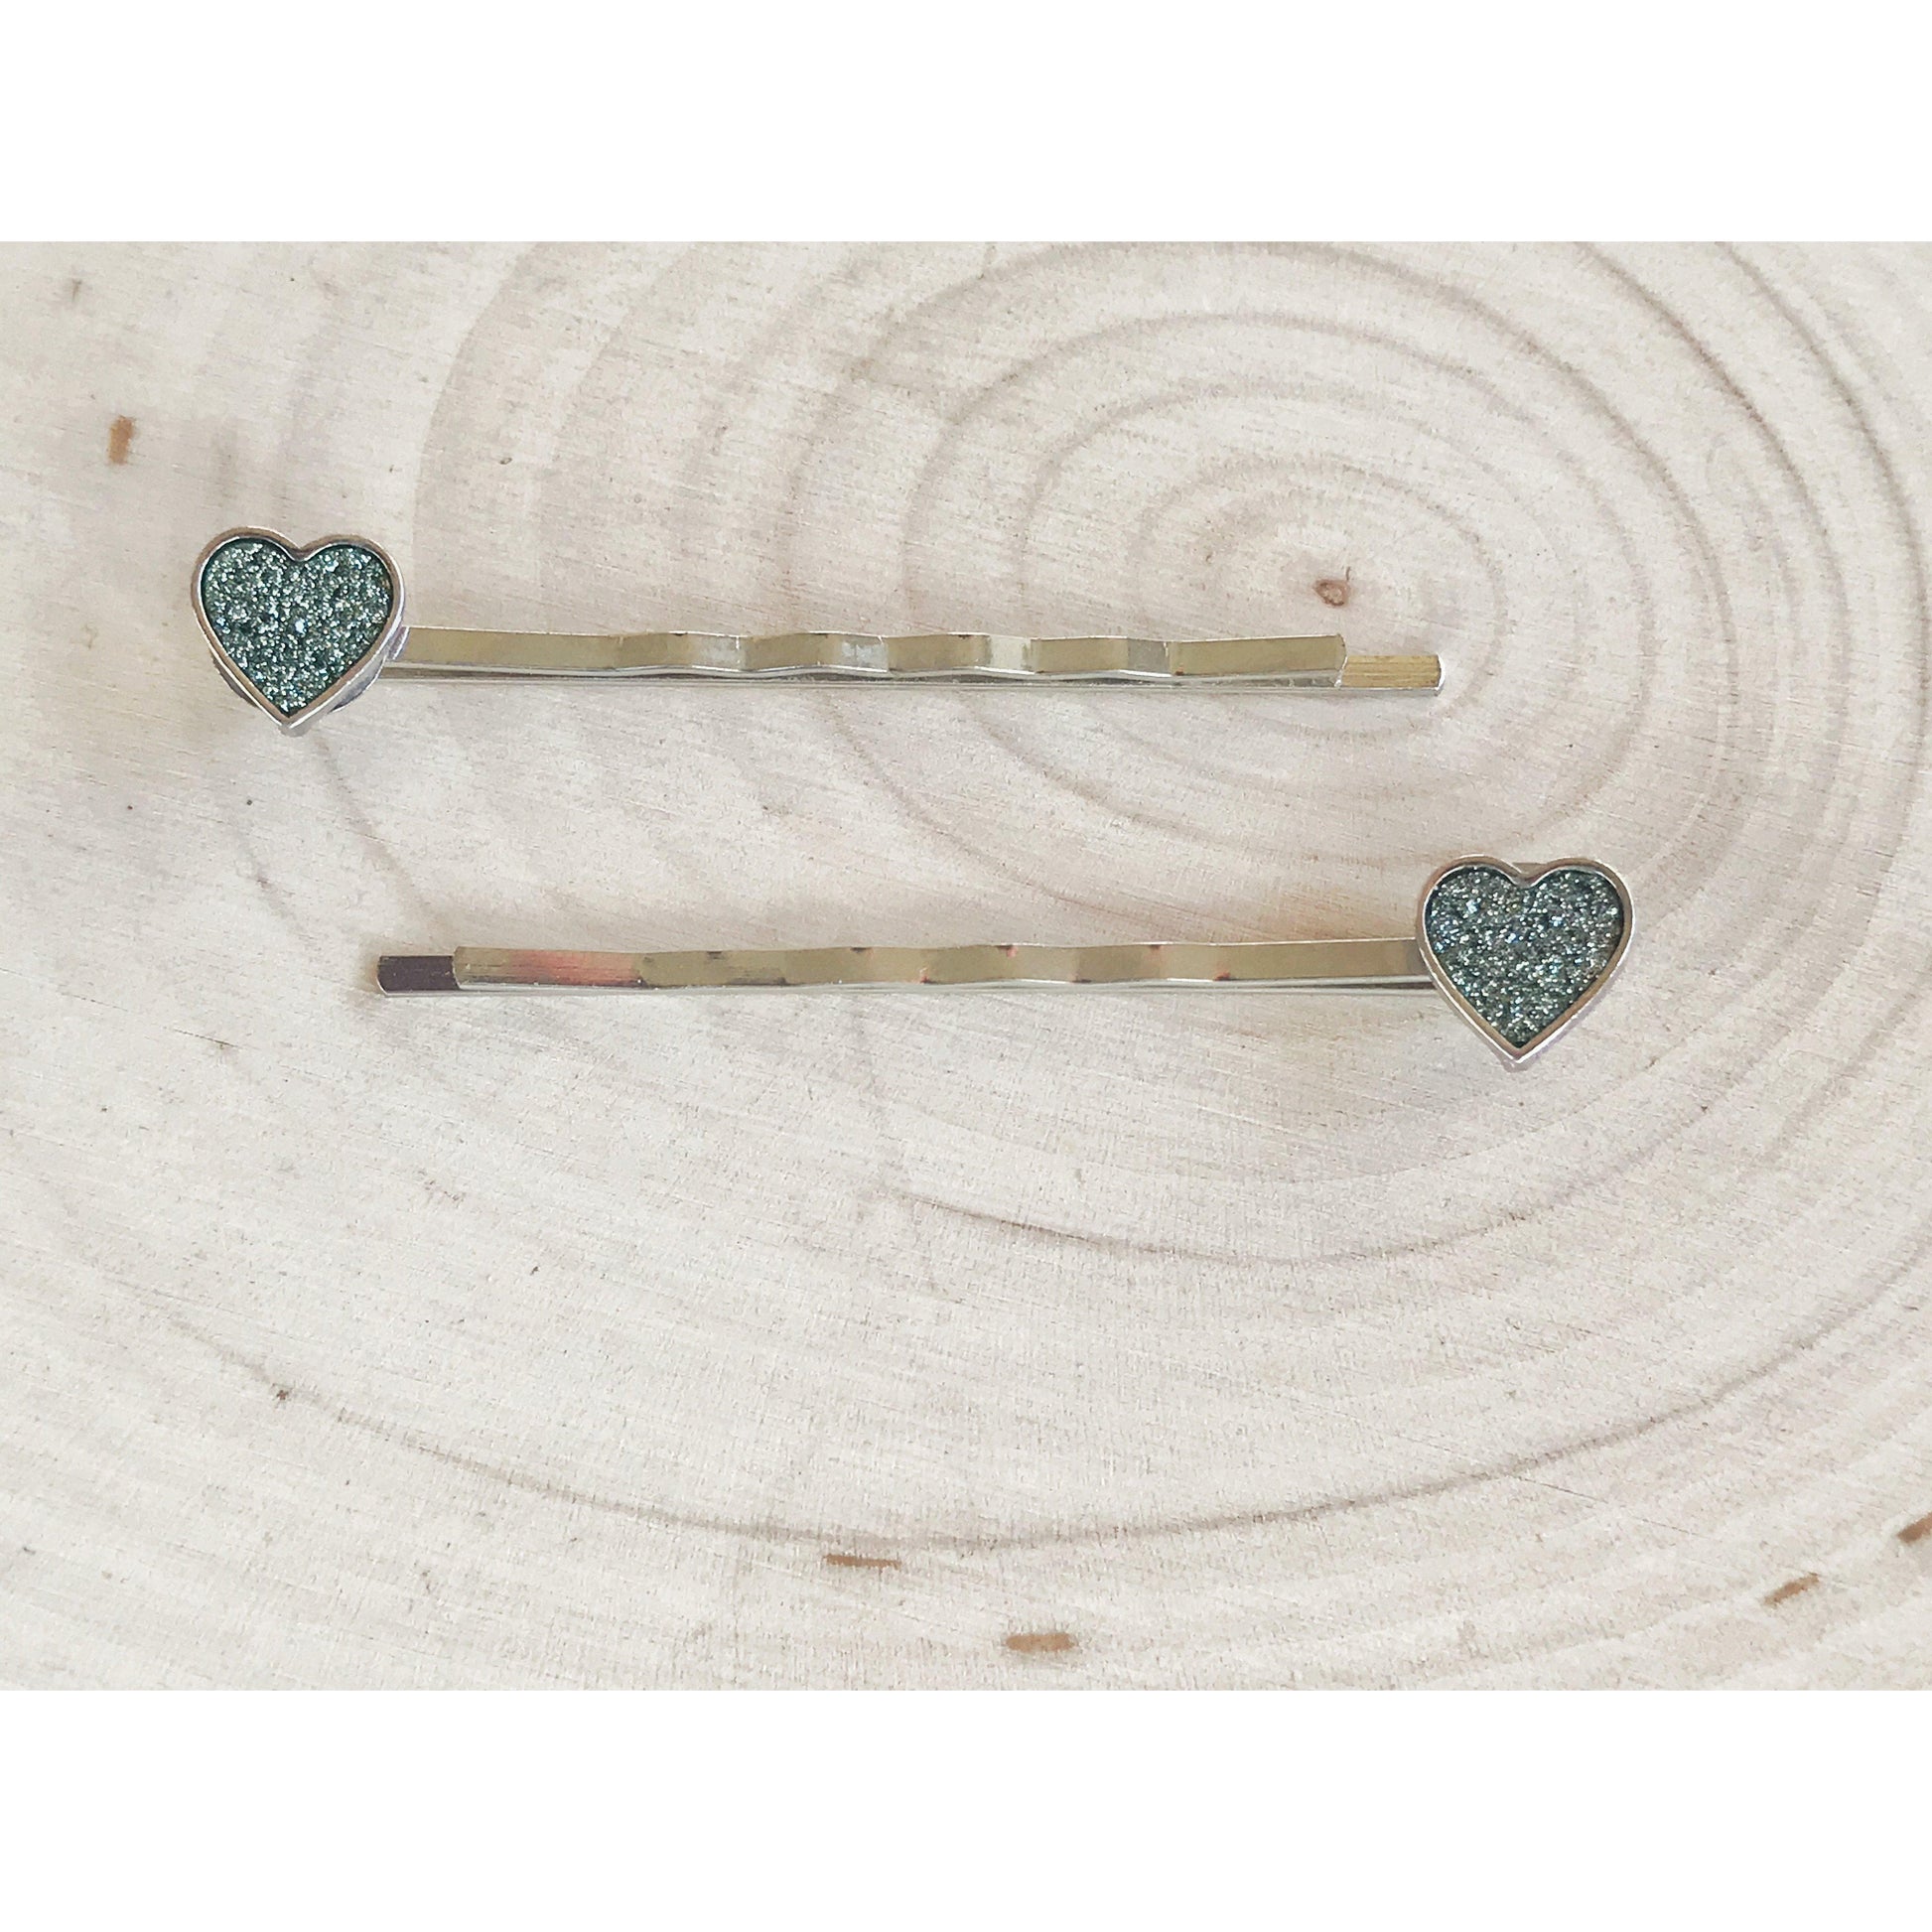 Tiny Green Glitter Heart Hair Pins - Delicate and Sparkling Accessories